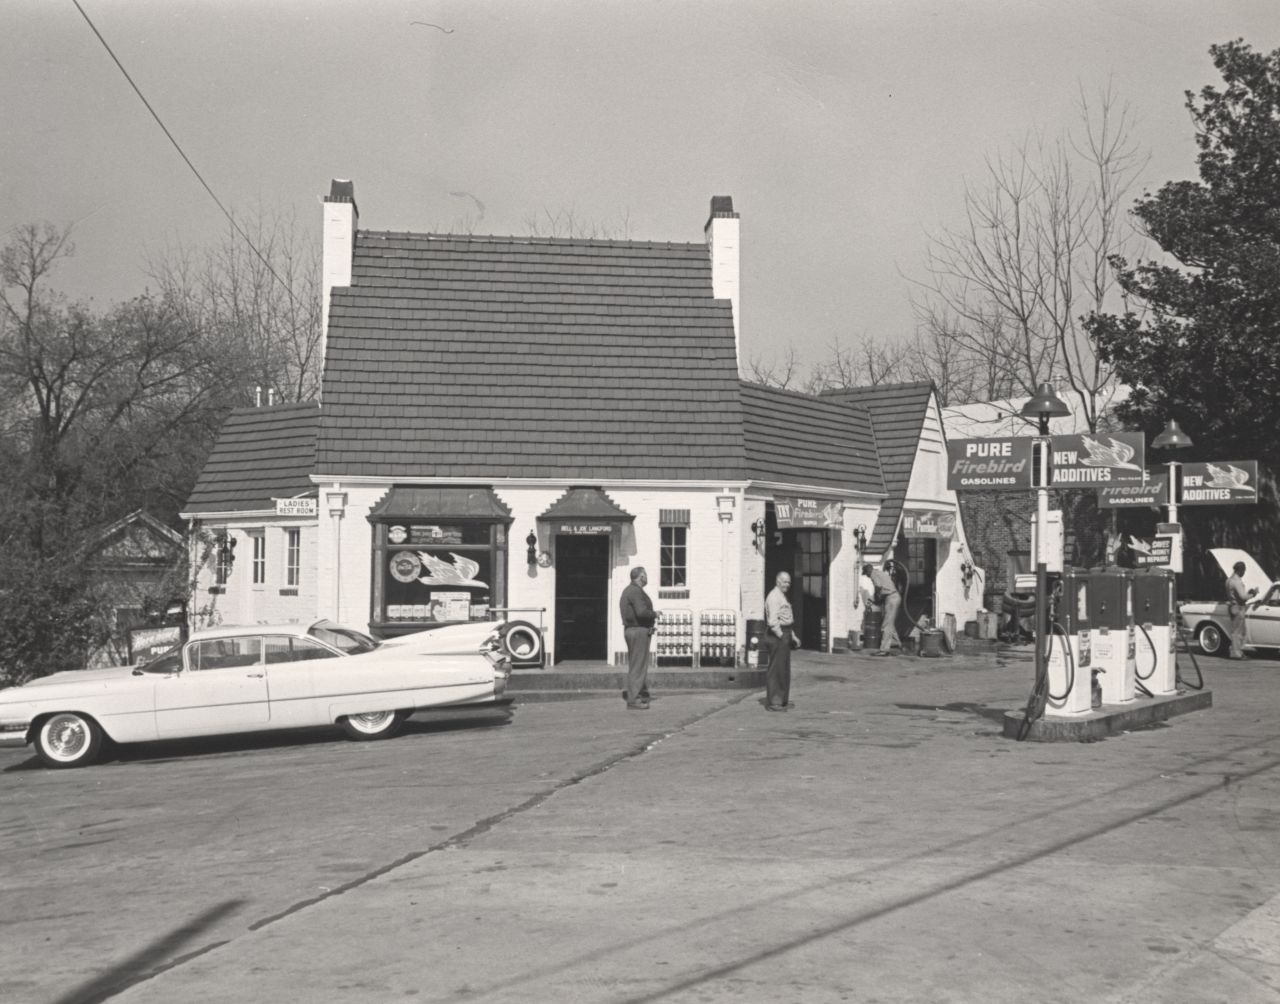 Diesel owner Justin Haynie believes this photo of the original Pure Oil filling station was taken in the 1950s. The gas station housed several different restaurants over the years, he said.